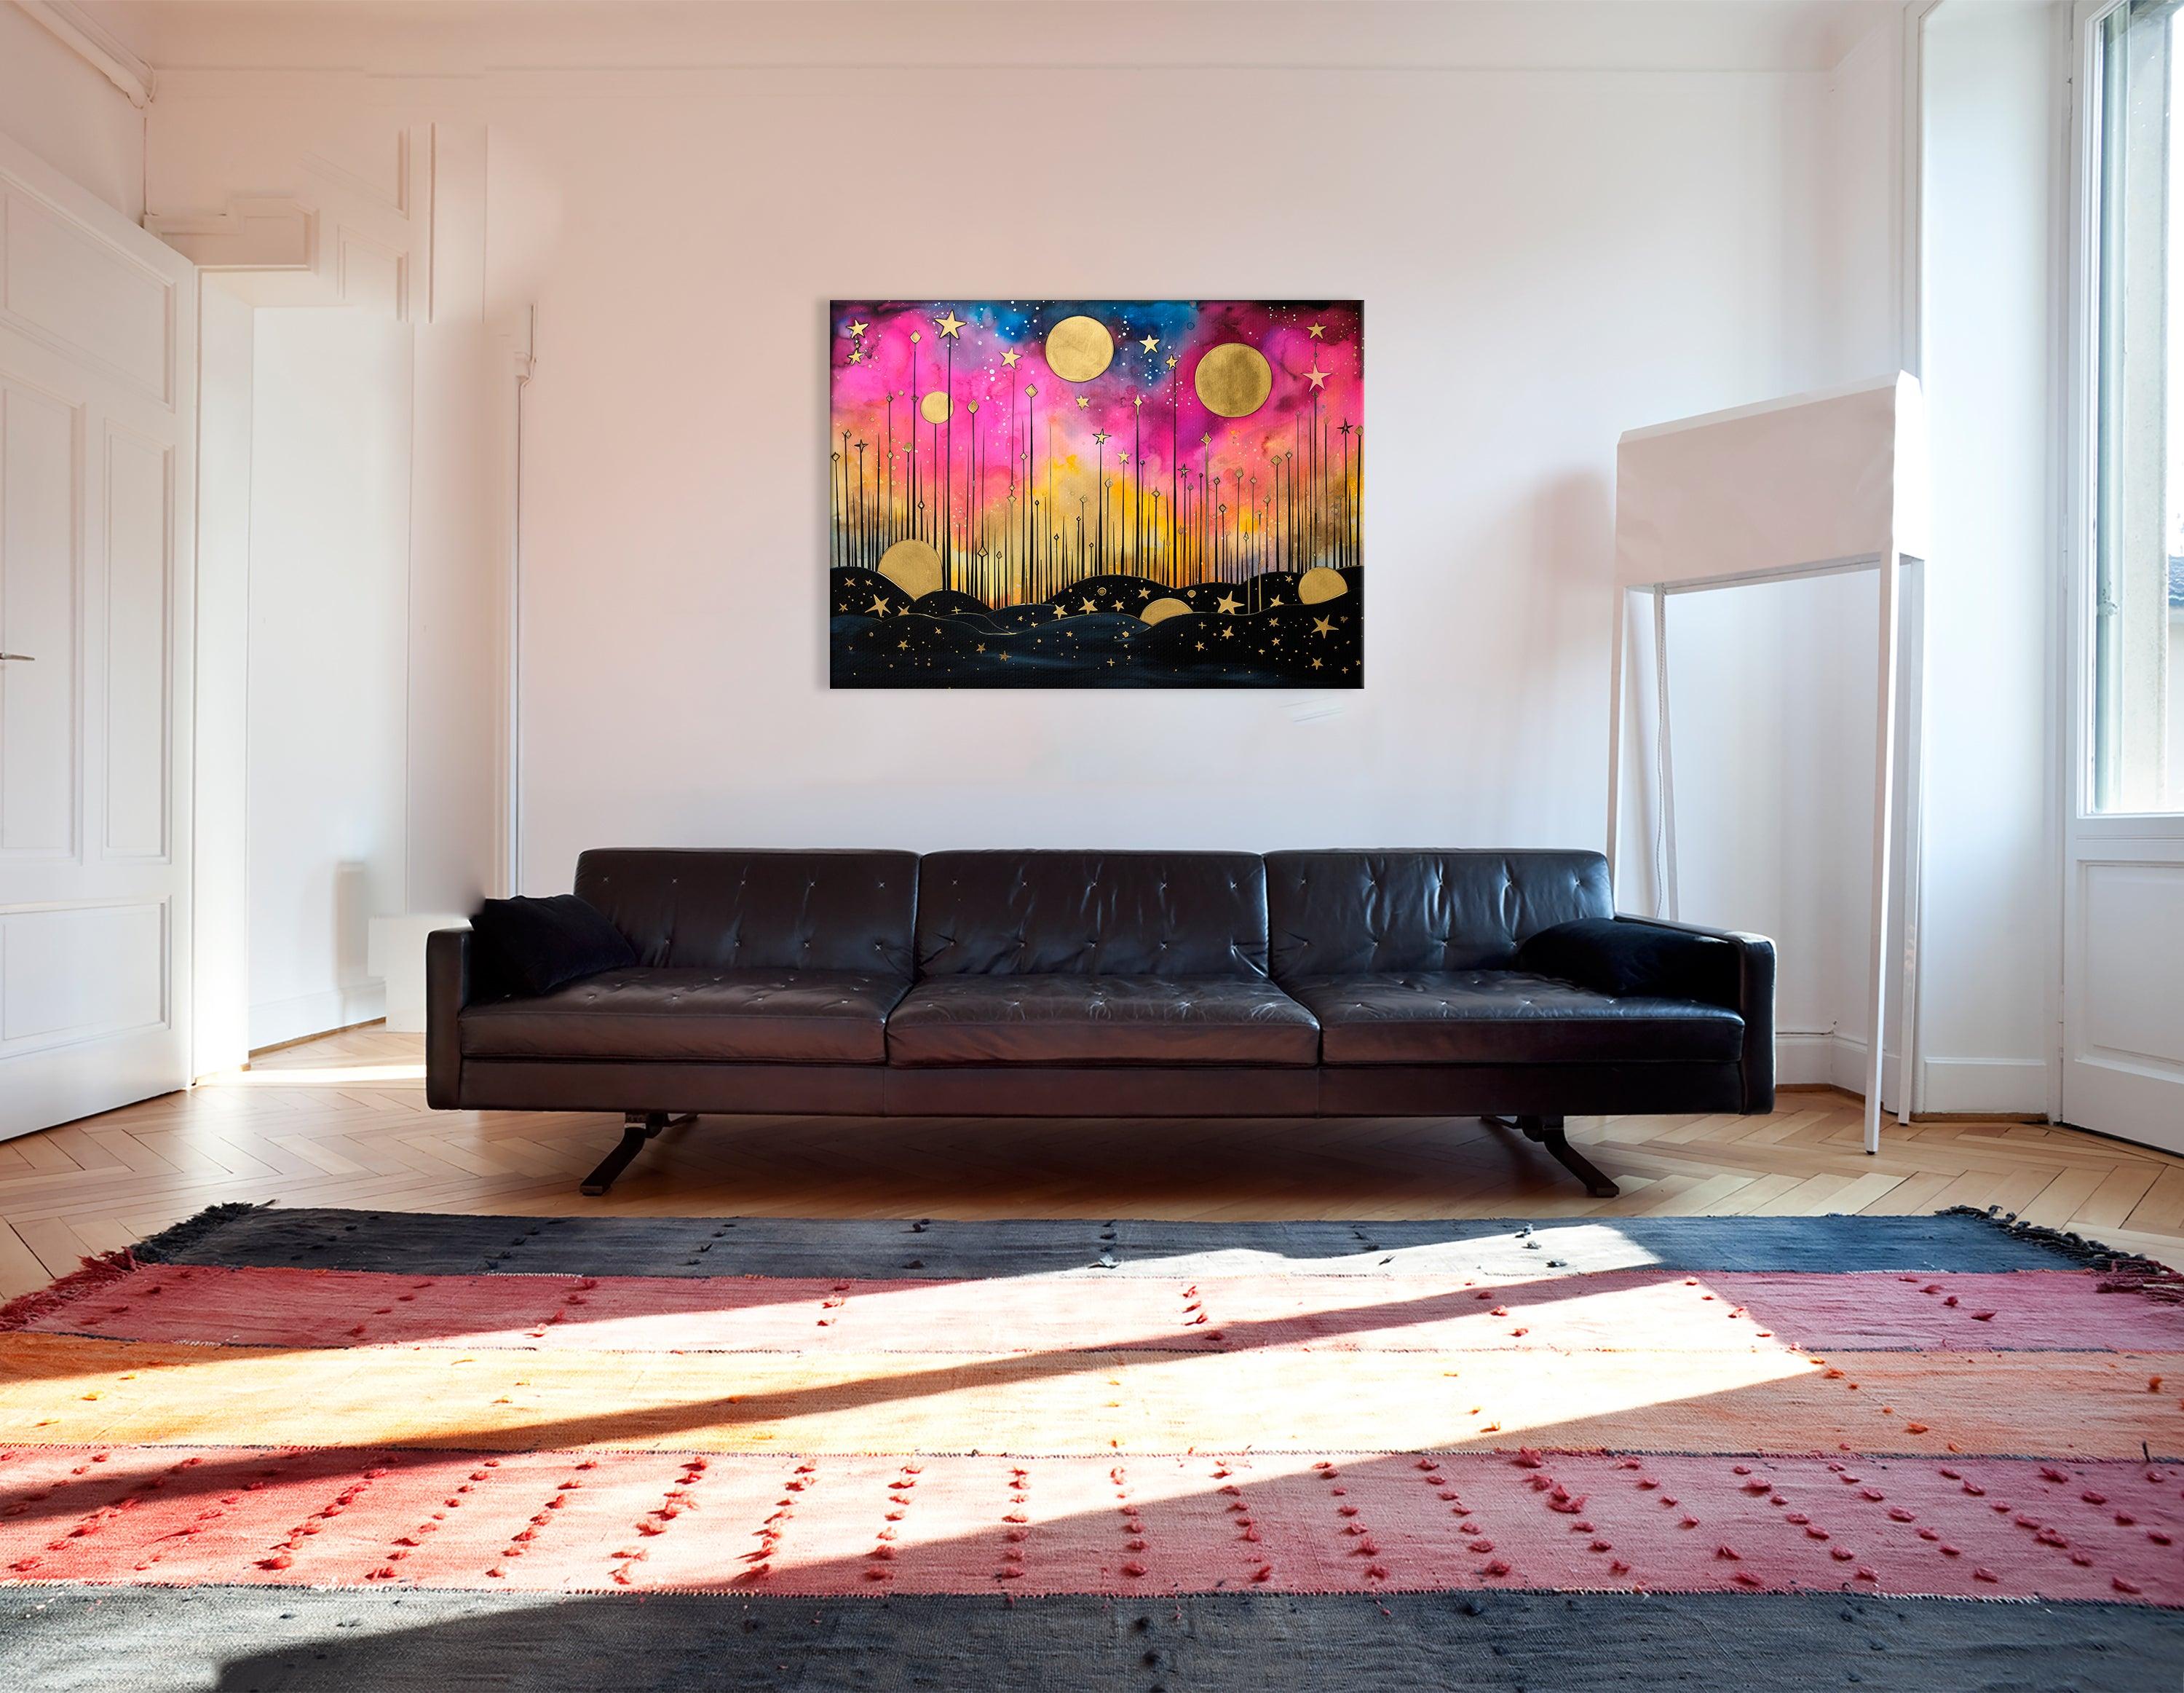 Landscape with Stars and Moons in Pink and Gold - Canvas Print - Artoholica Ready to Hang Canvas Print